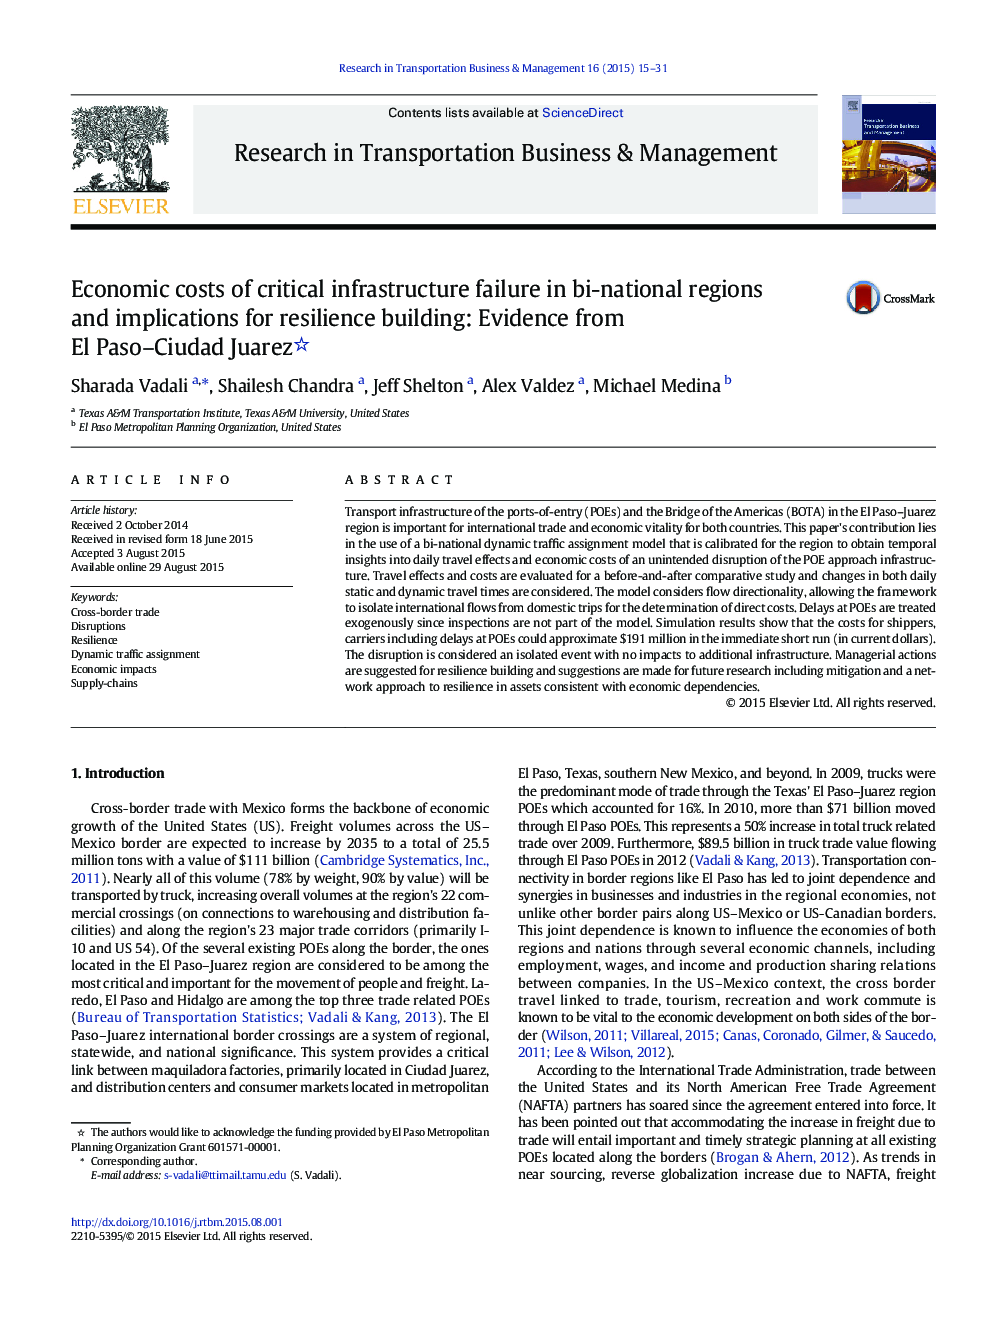 Economic costs of critical infrastructure failure in bi-national regions and implications for resilience building: Evidence from El Paso–Ciudad Juarez 